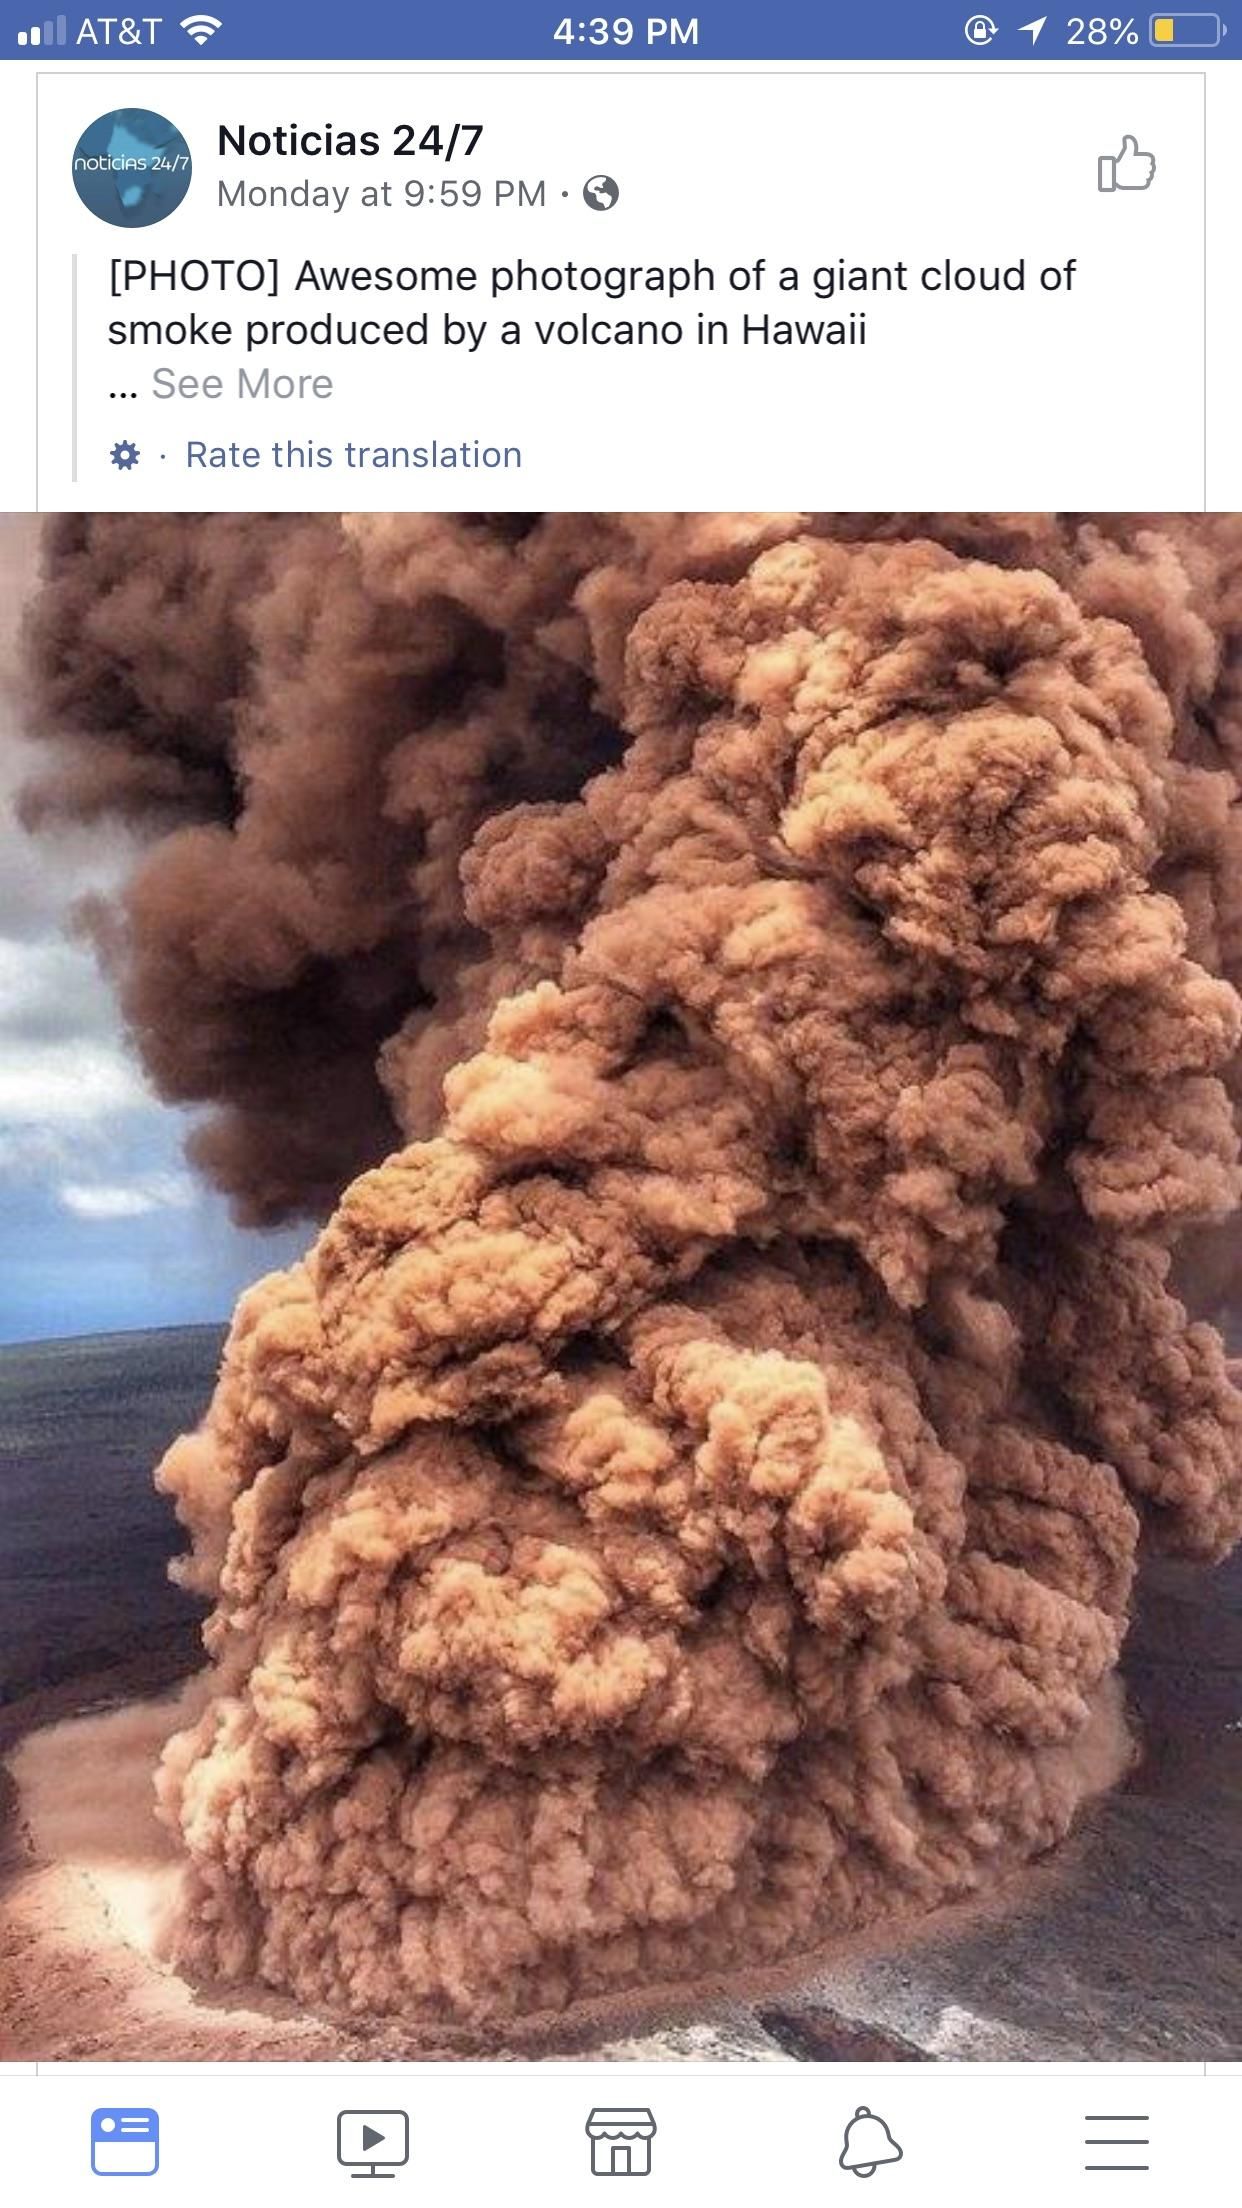 I thought this was a high quality photo of a chicken strip. Turns out to be a cloud of smoke from a volcano in Hawaii.